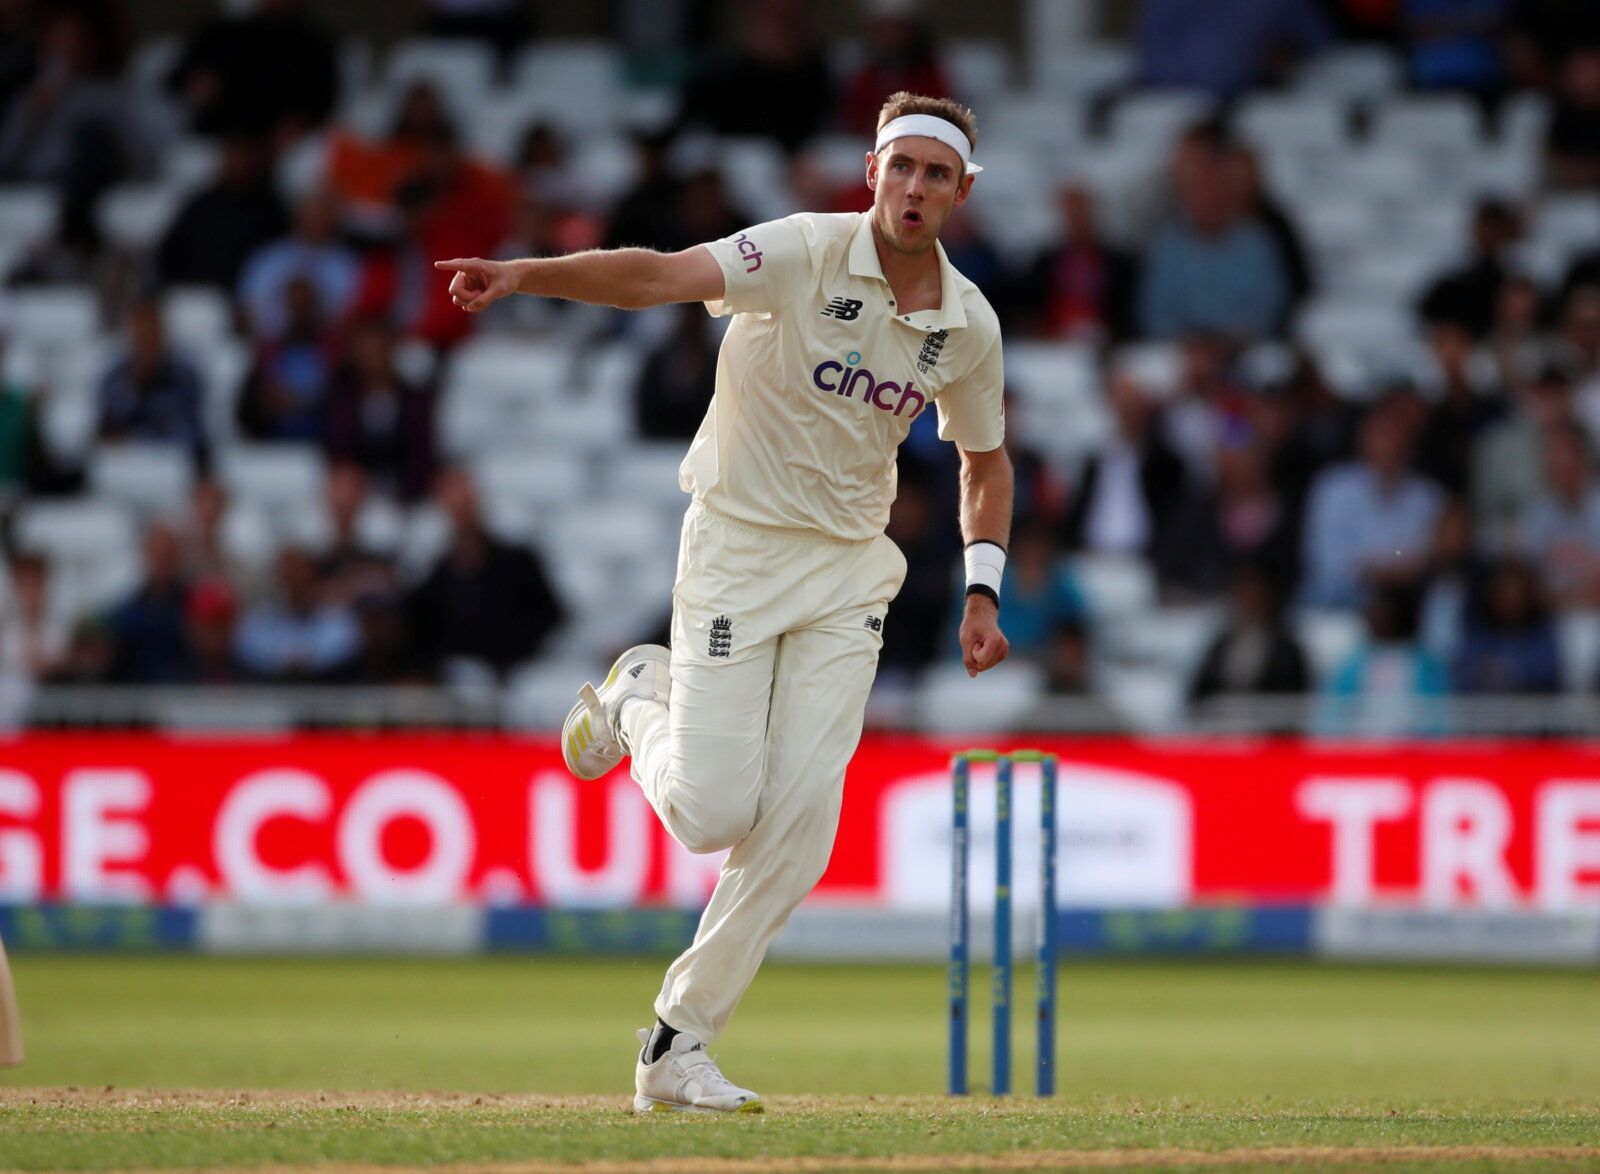 Cricket - First Test - England v India - Trent Bridge, Nottingham, Britain - August 7, 2021 England's Stuart Broad celebrates taking the wicket of India's KL Rahul  Action Images via Reuters/Paul Childs